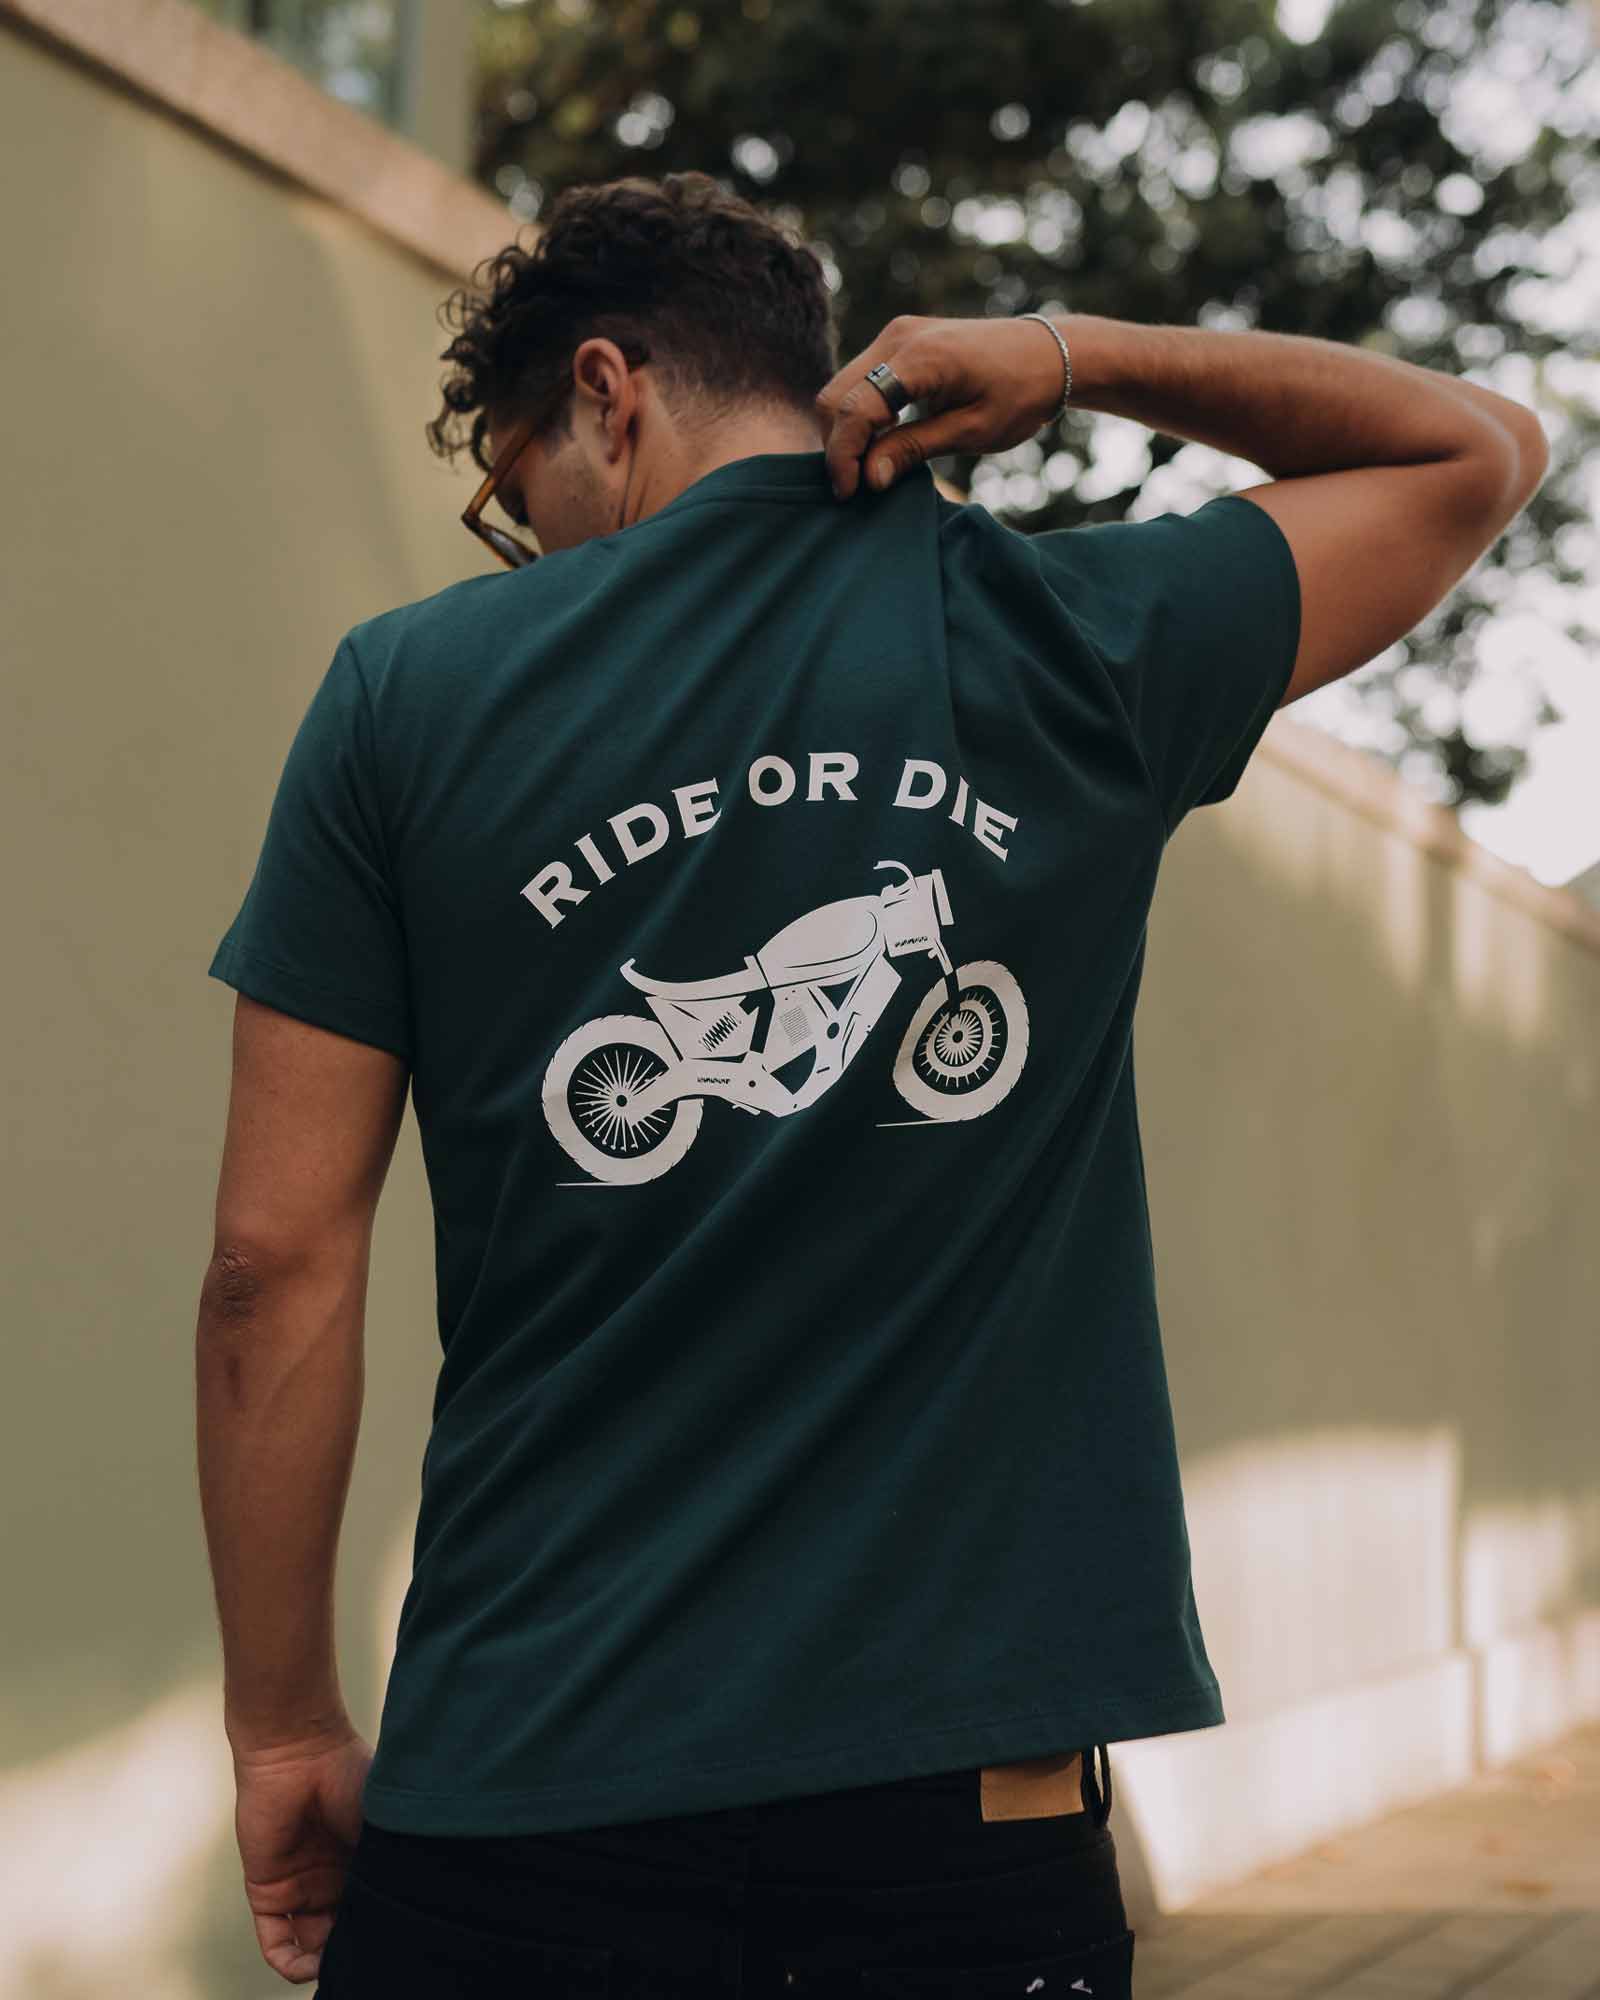 Ride or Die - T-shirt Verde 'Ride or Die' no corpo do modelo - Regular Fit - T-shirts Unissexo Online - Dicci